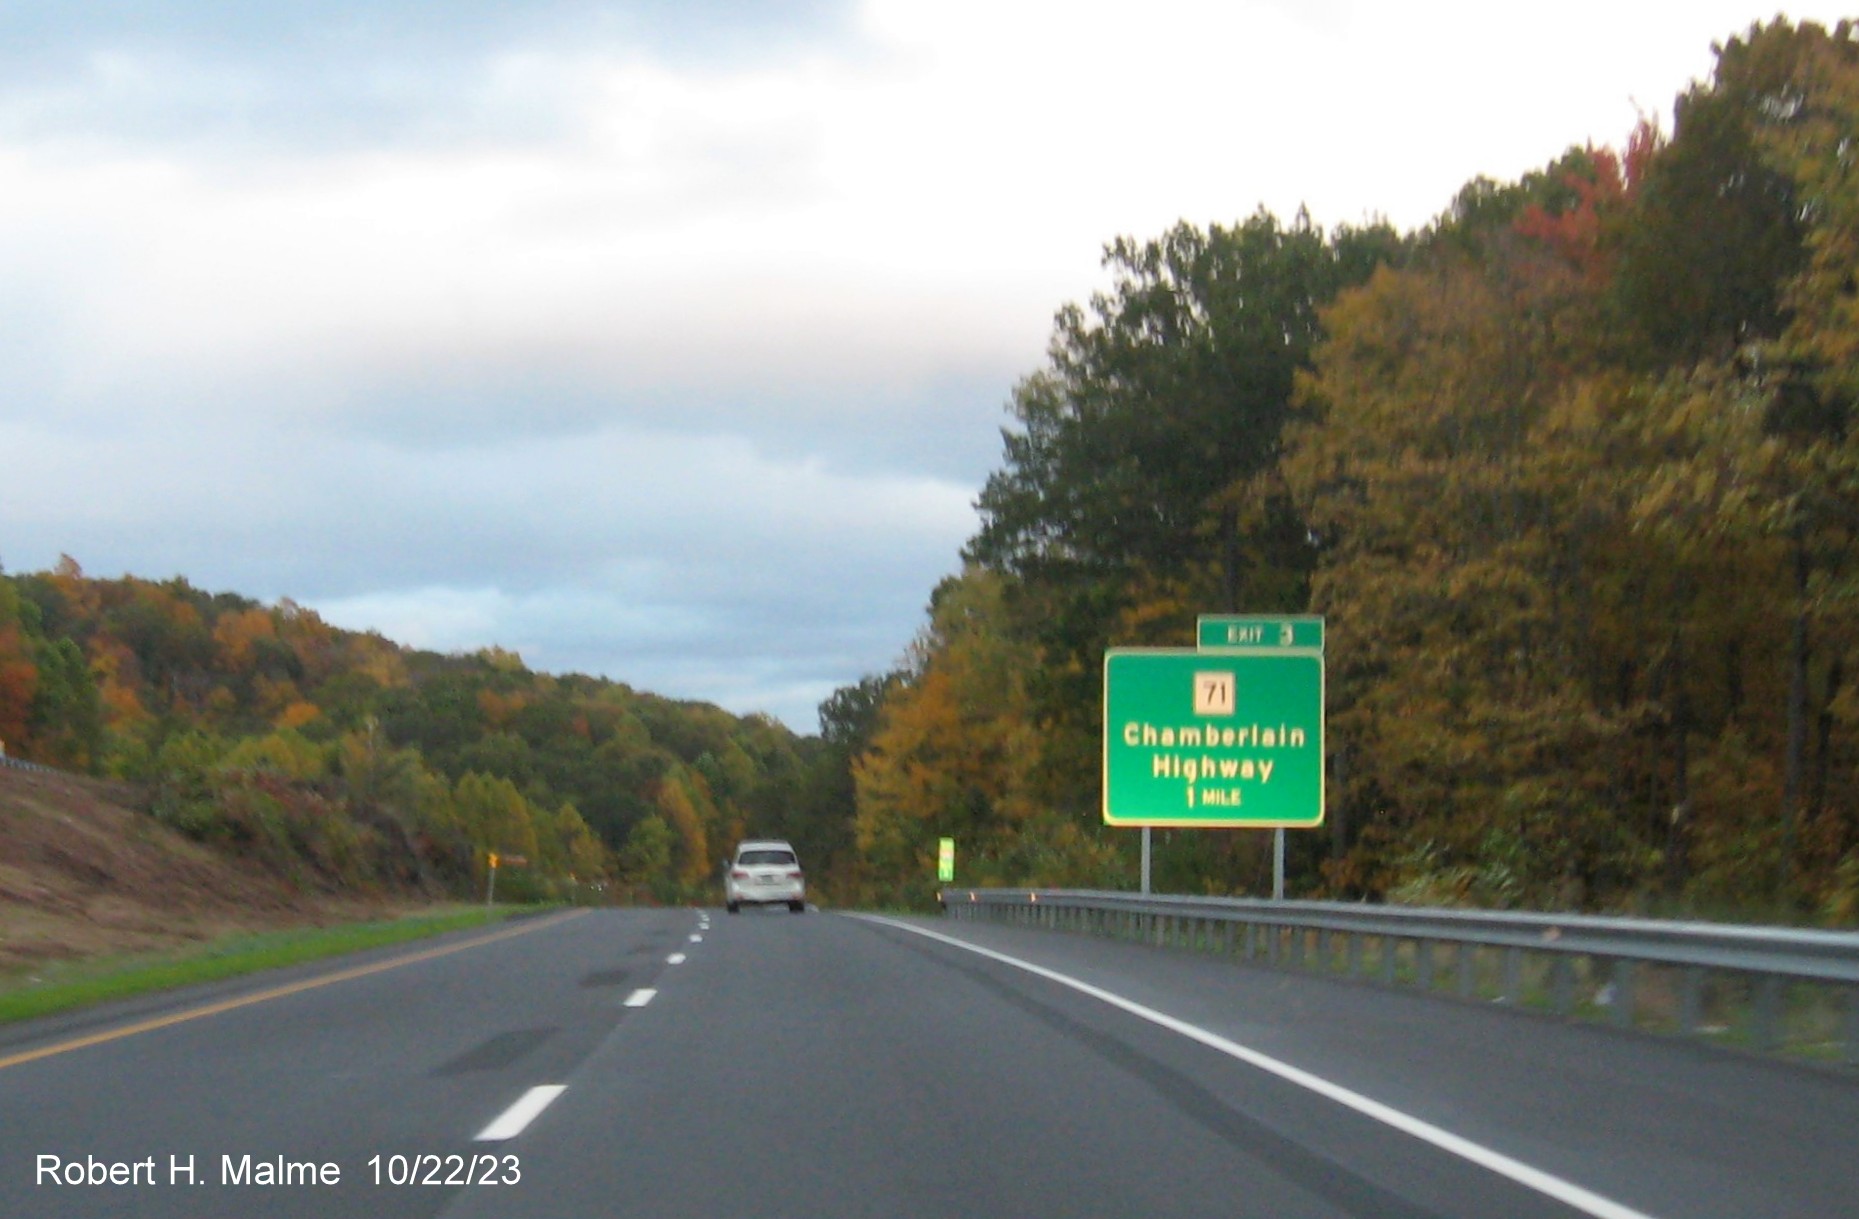 Image of new one mile advance sign for the NC 71 exit with the new milepost based exit number, October 2023